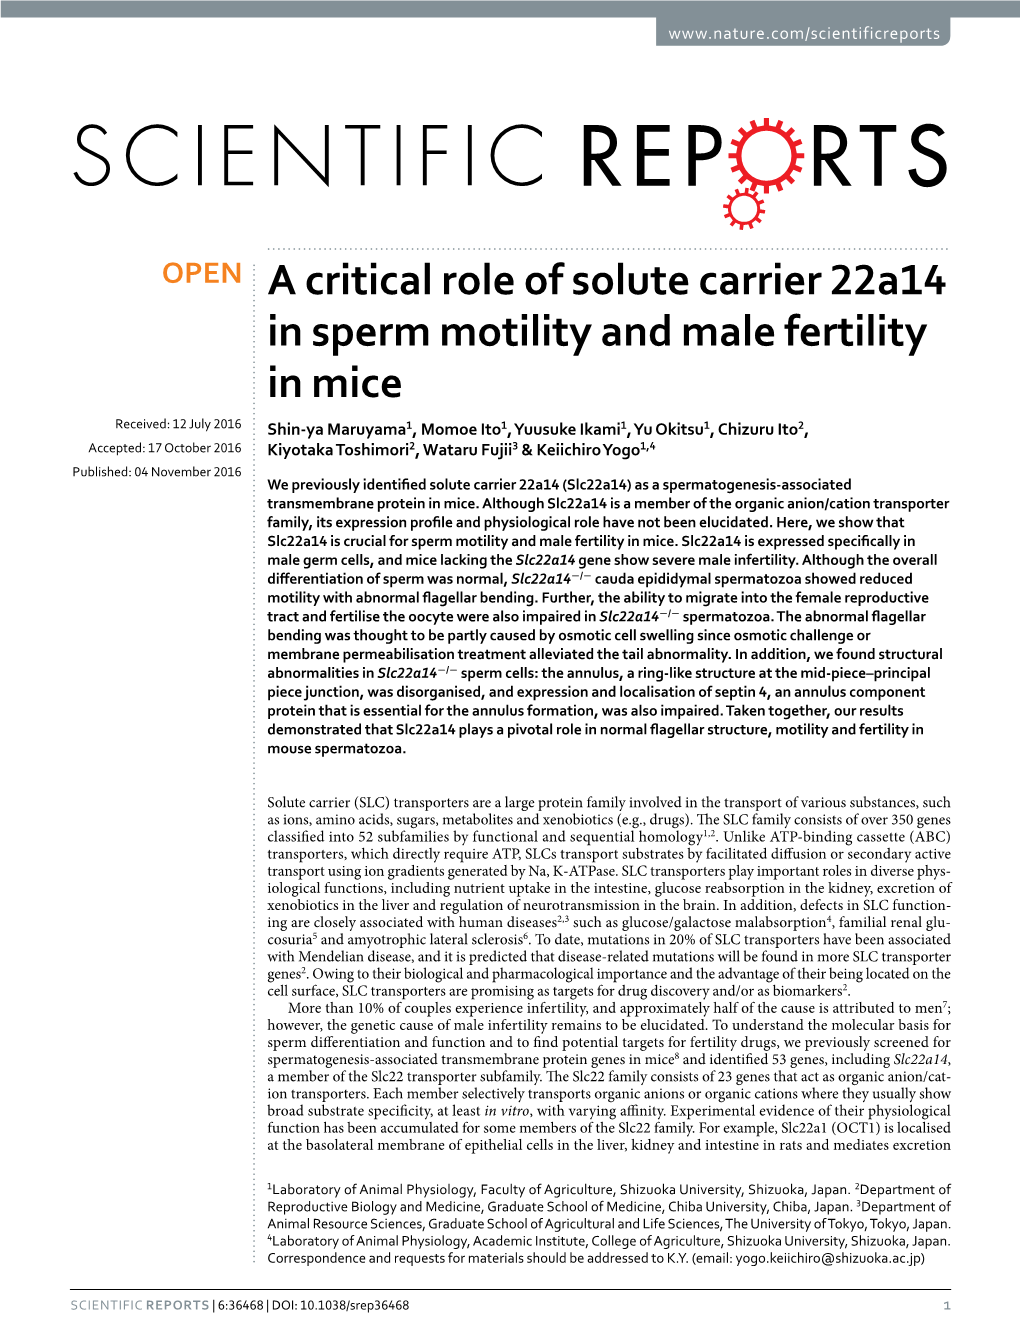 A Critical Role of Solute Carrier 22A14 in Sperm Motility And